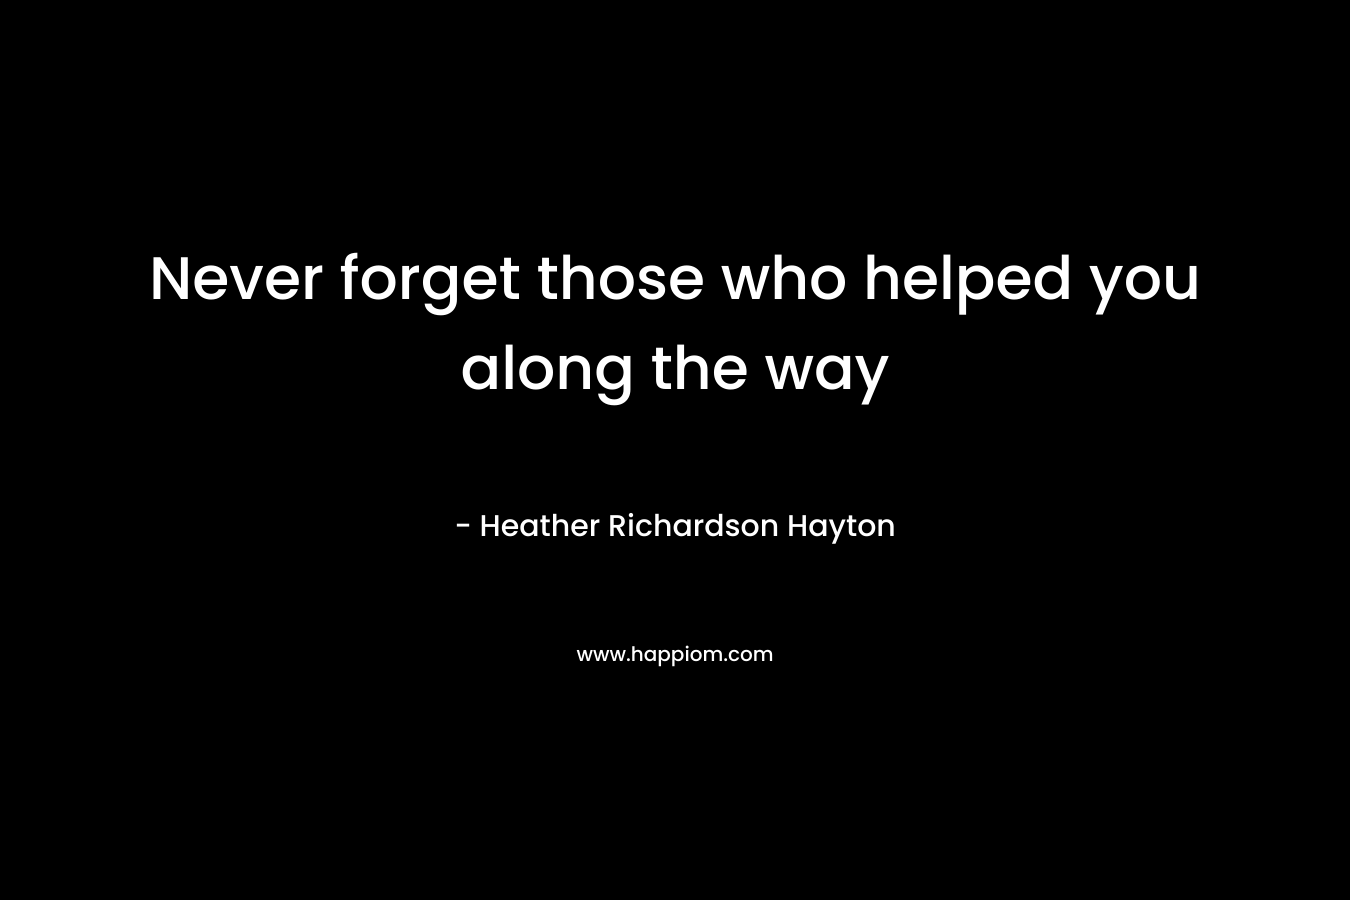 Never forget those who helped you along the way – Heather Richardson Hayton